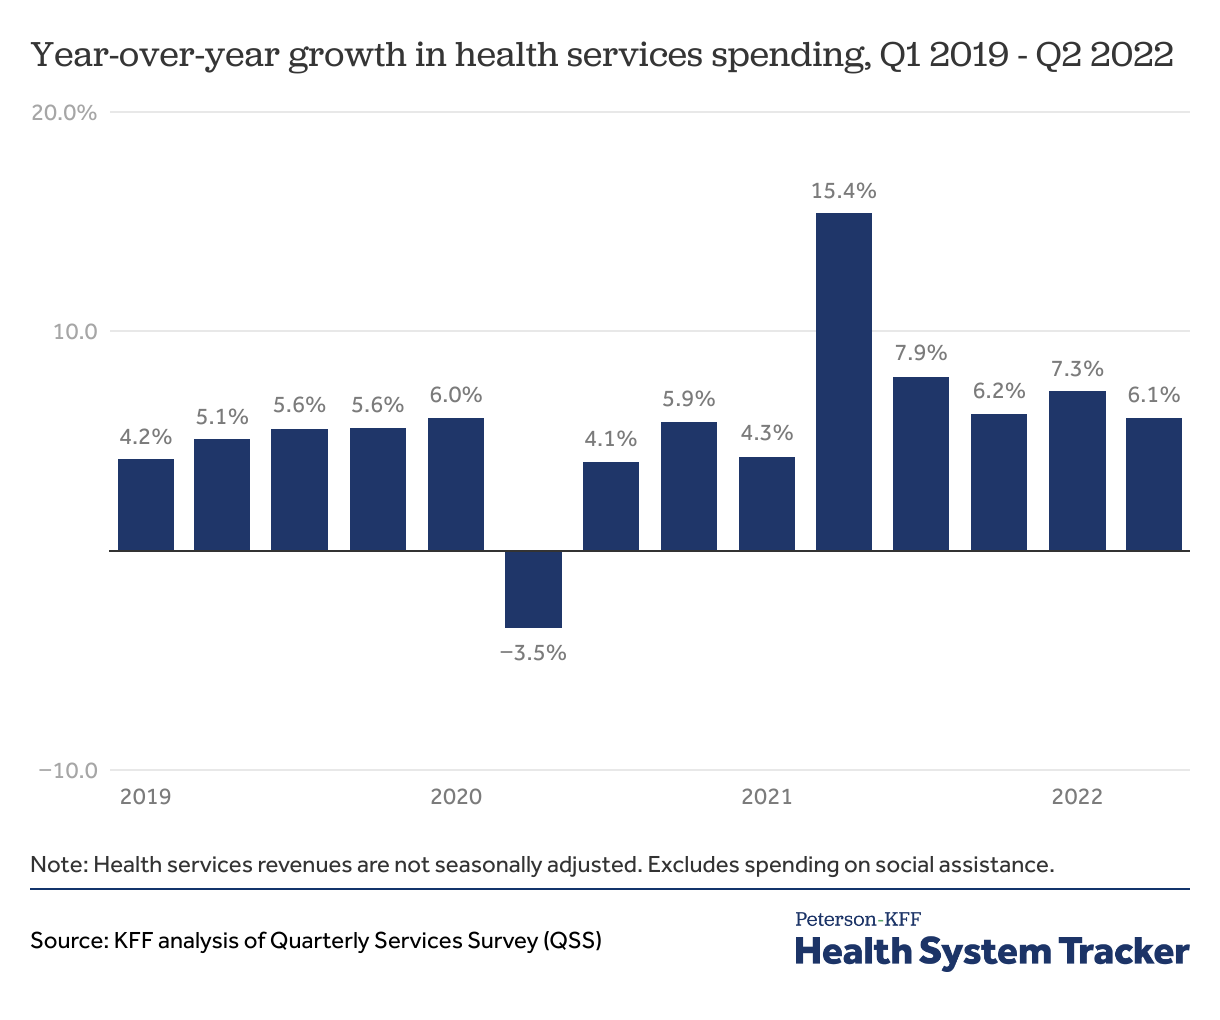 2 U.S. Healthcare Data Today: Current State of Play